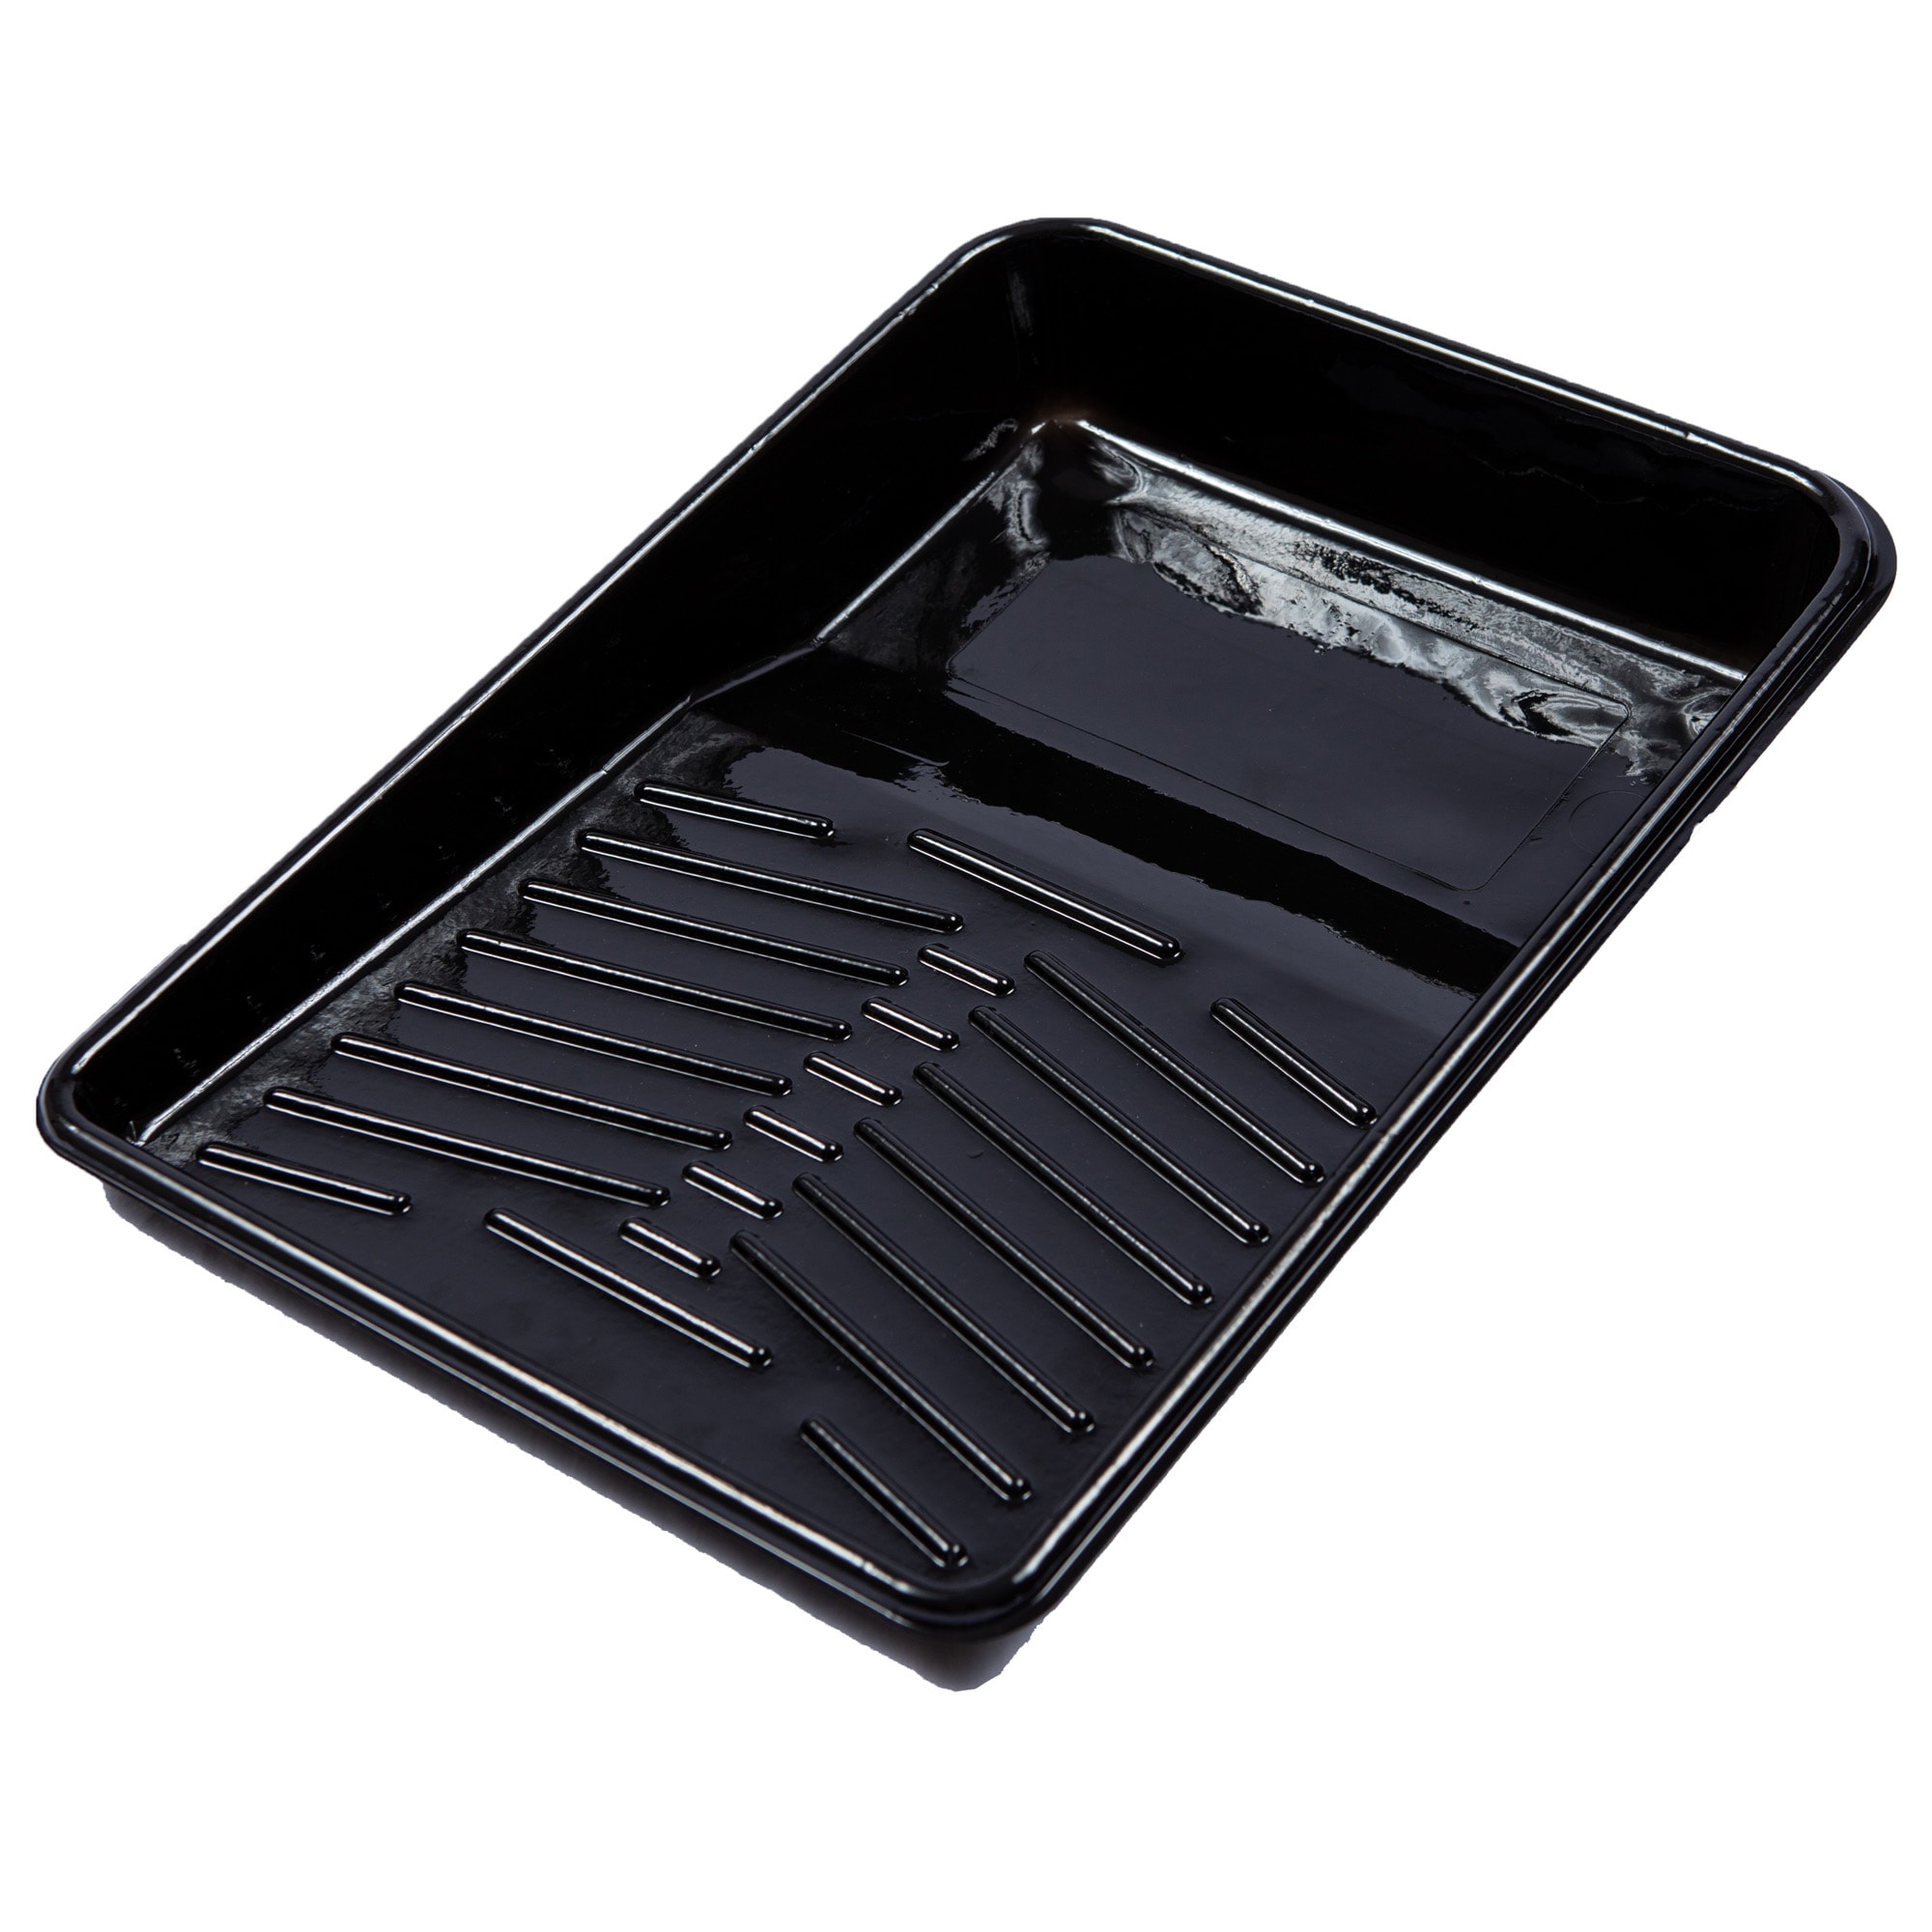 Encore 02150 Jumbo Tray Liner, Fits Most 4 qt. Metal Trays at Tractor  Supply Co.